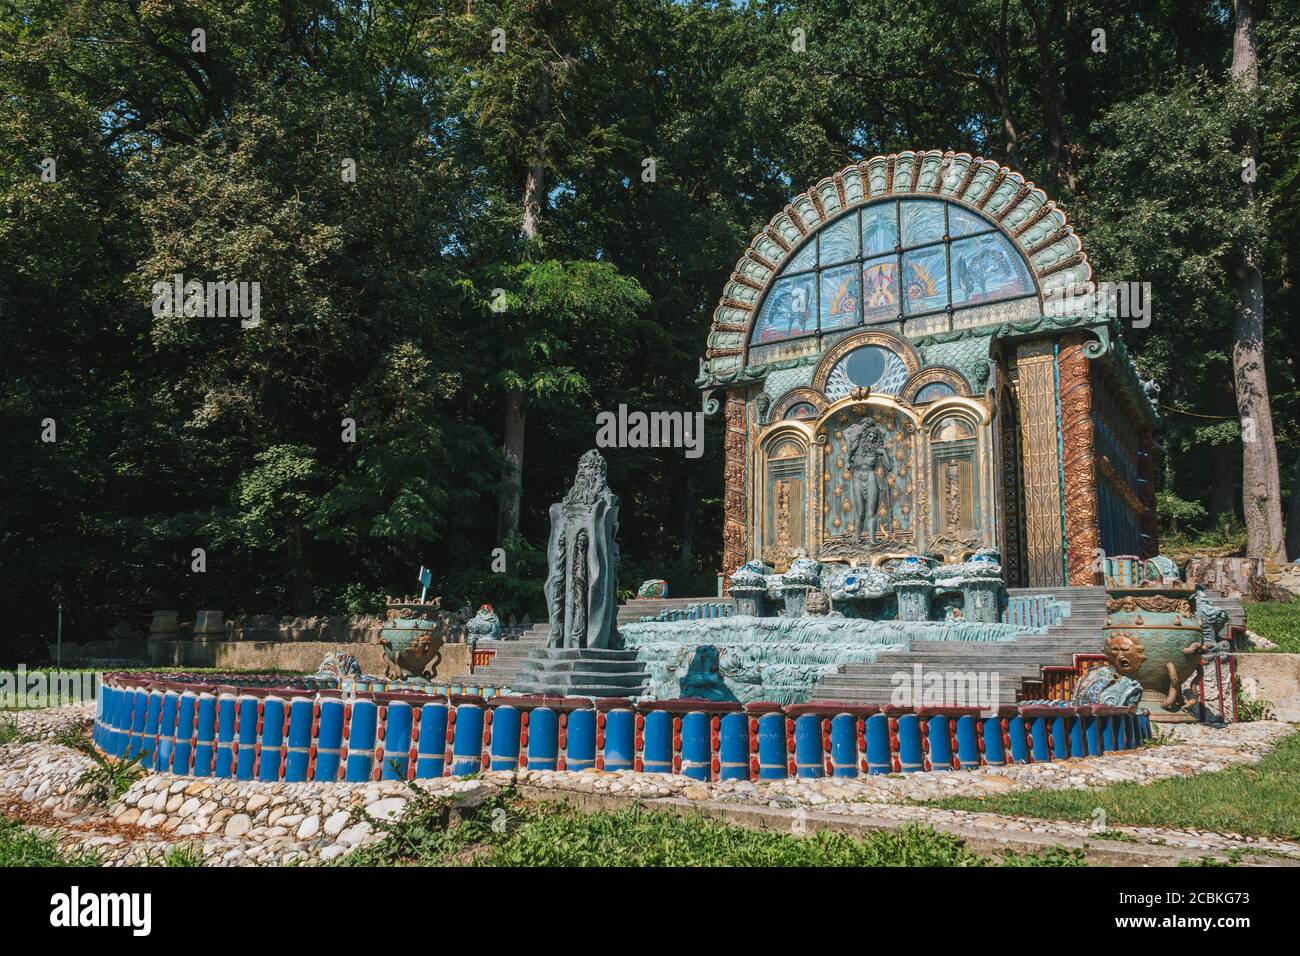 Vienna, Austria - August 8 2020: Fountain House Nymphaeum Omega in the Park of the Ernst Fuchs Museum, at the Otto Wagner Villa in the Hütteldor Subur Stock Photo